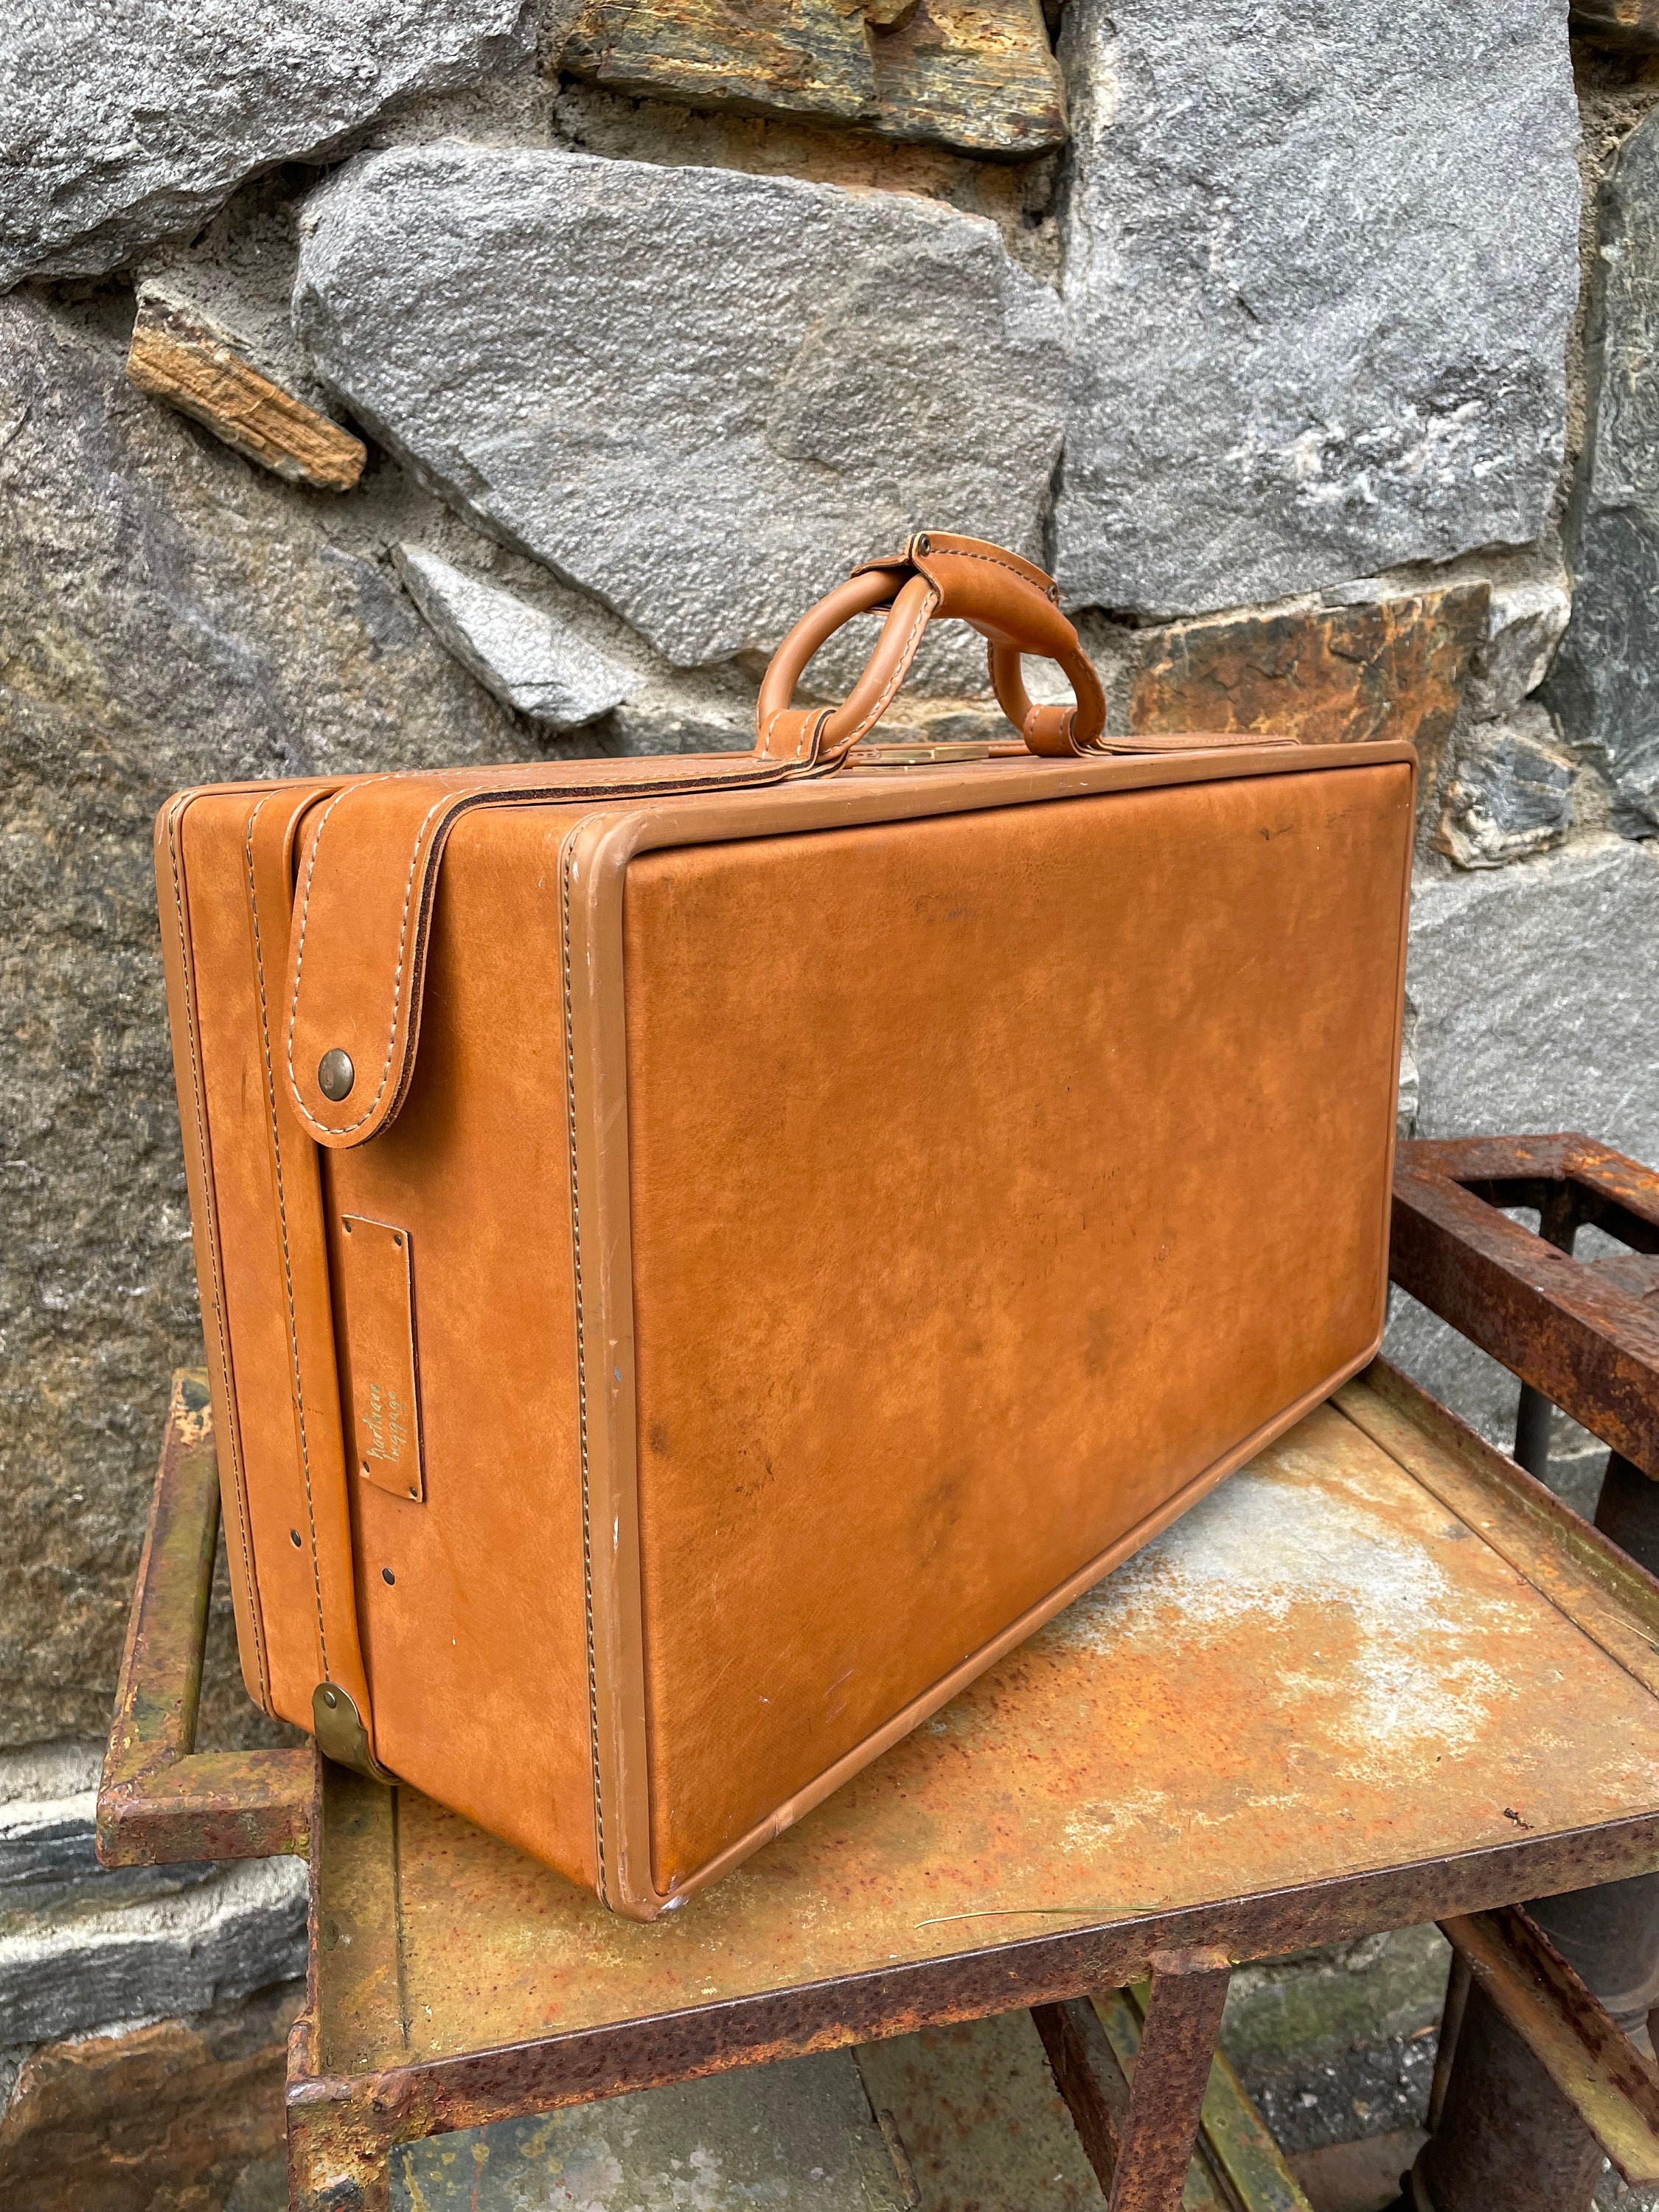 20th Century American Leather Briefcase By Hartmann, c.1920